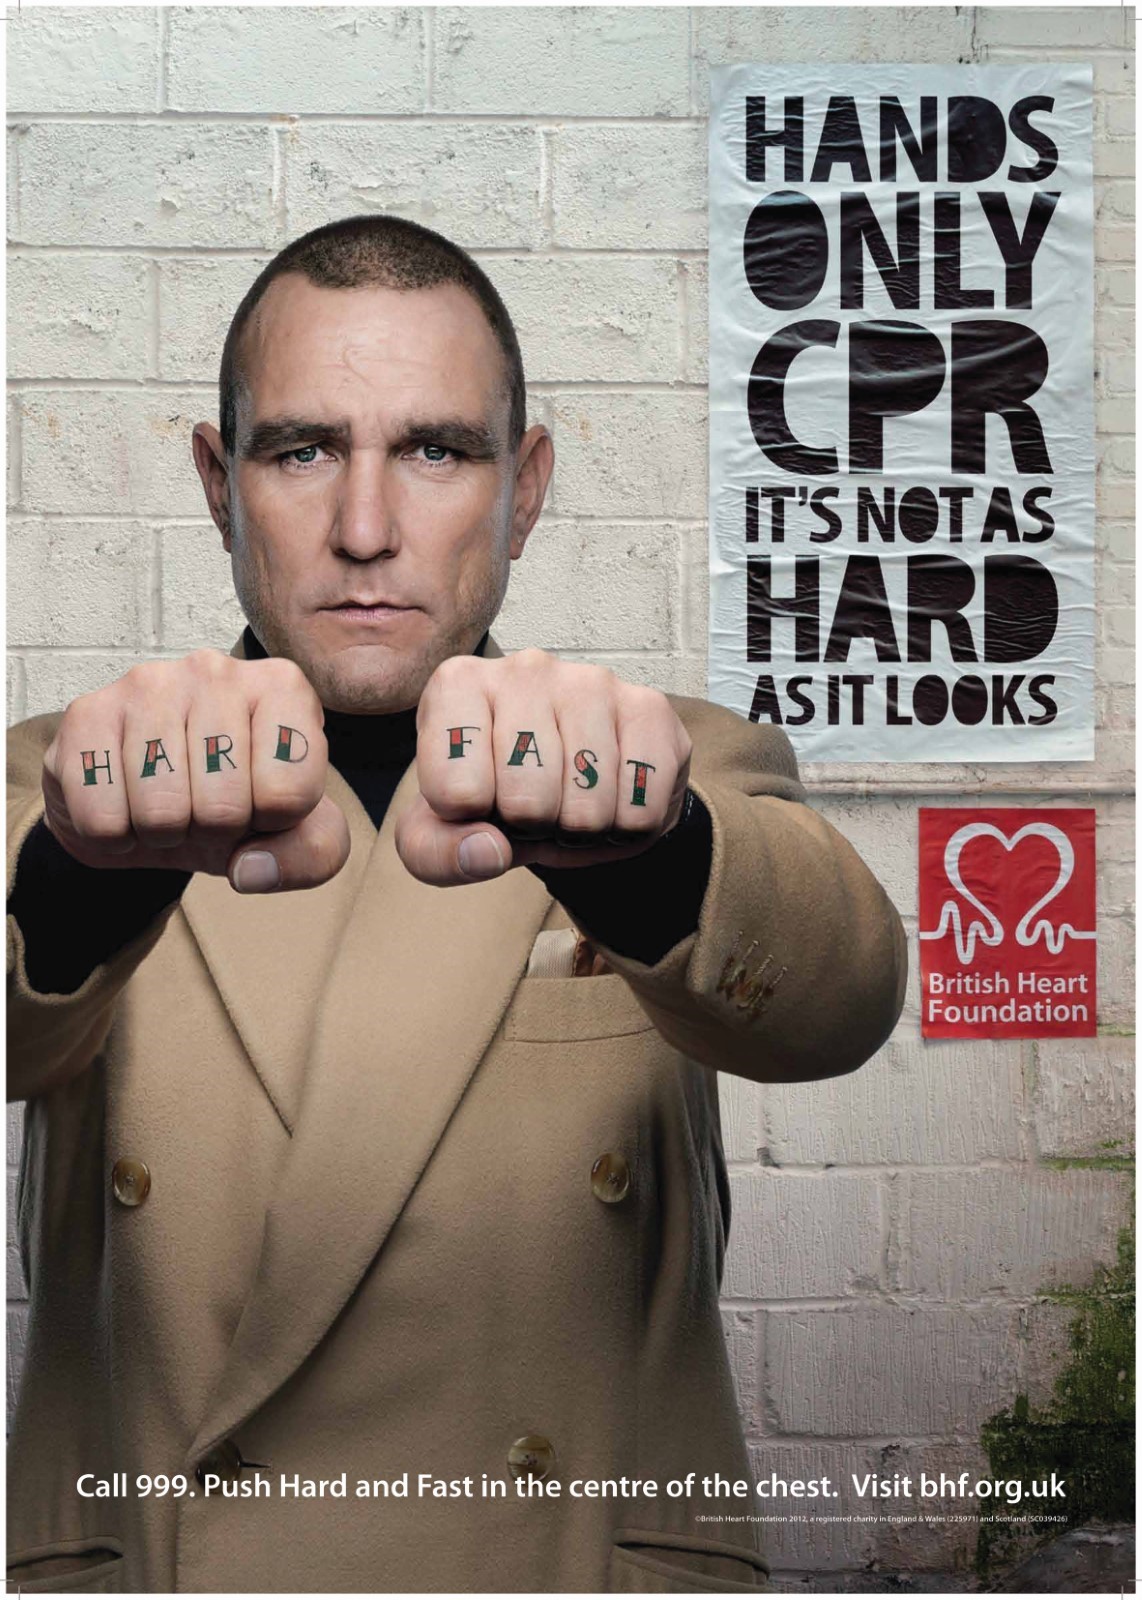 Hands only CPR campaign led by Vinnie Jones in 2012